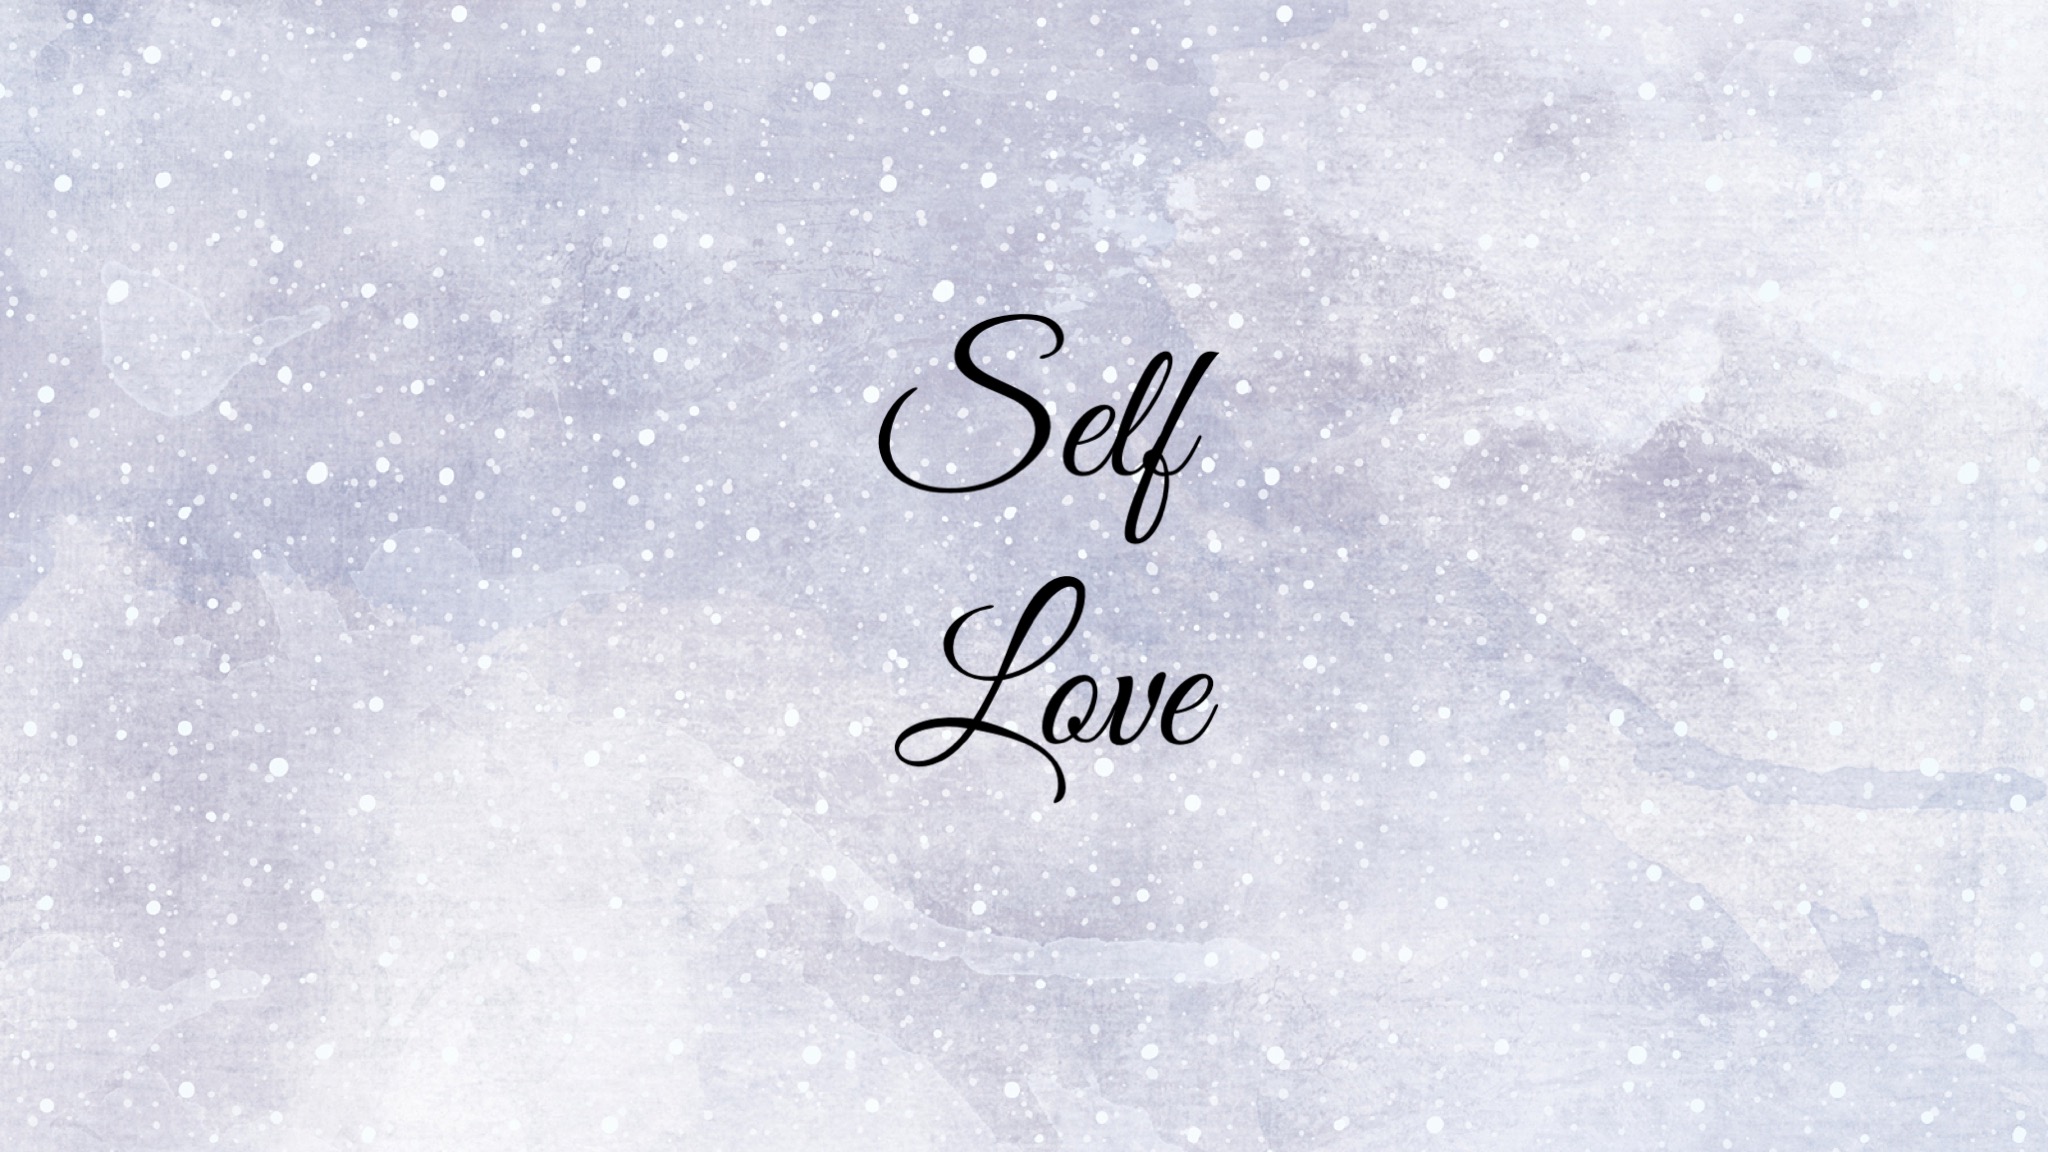 Self Love: An Important Lesson Taught by Louise Hay - My Natural Healer